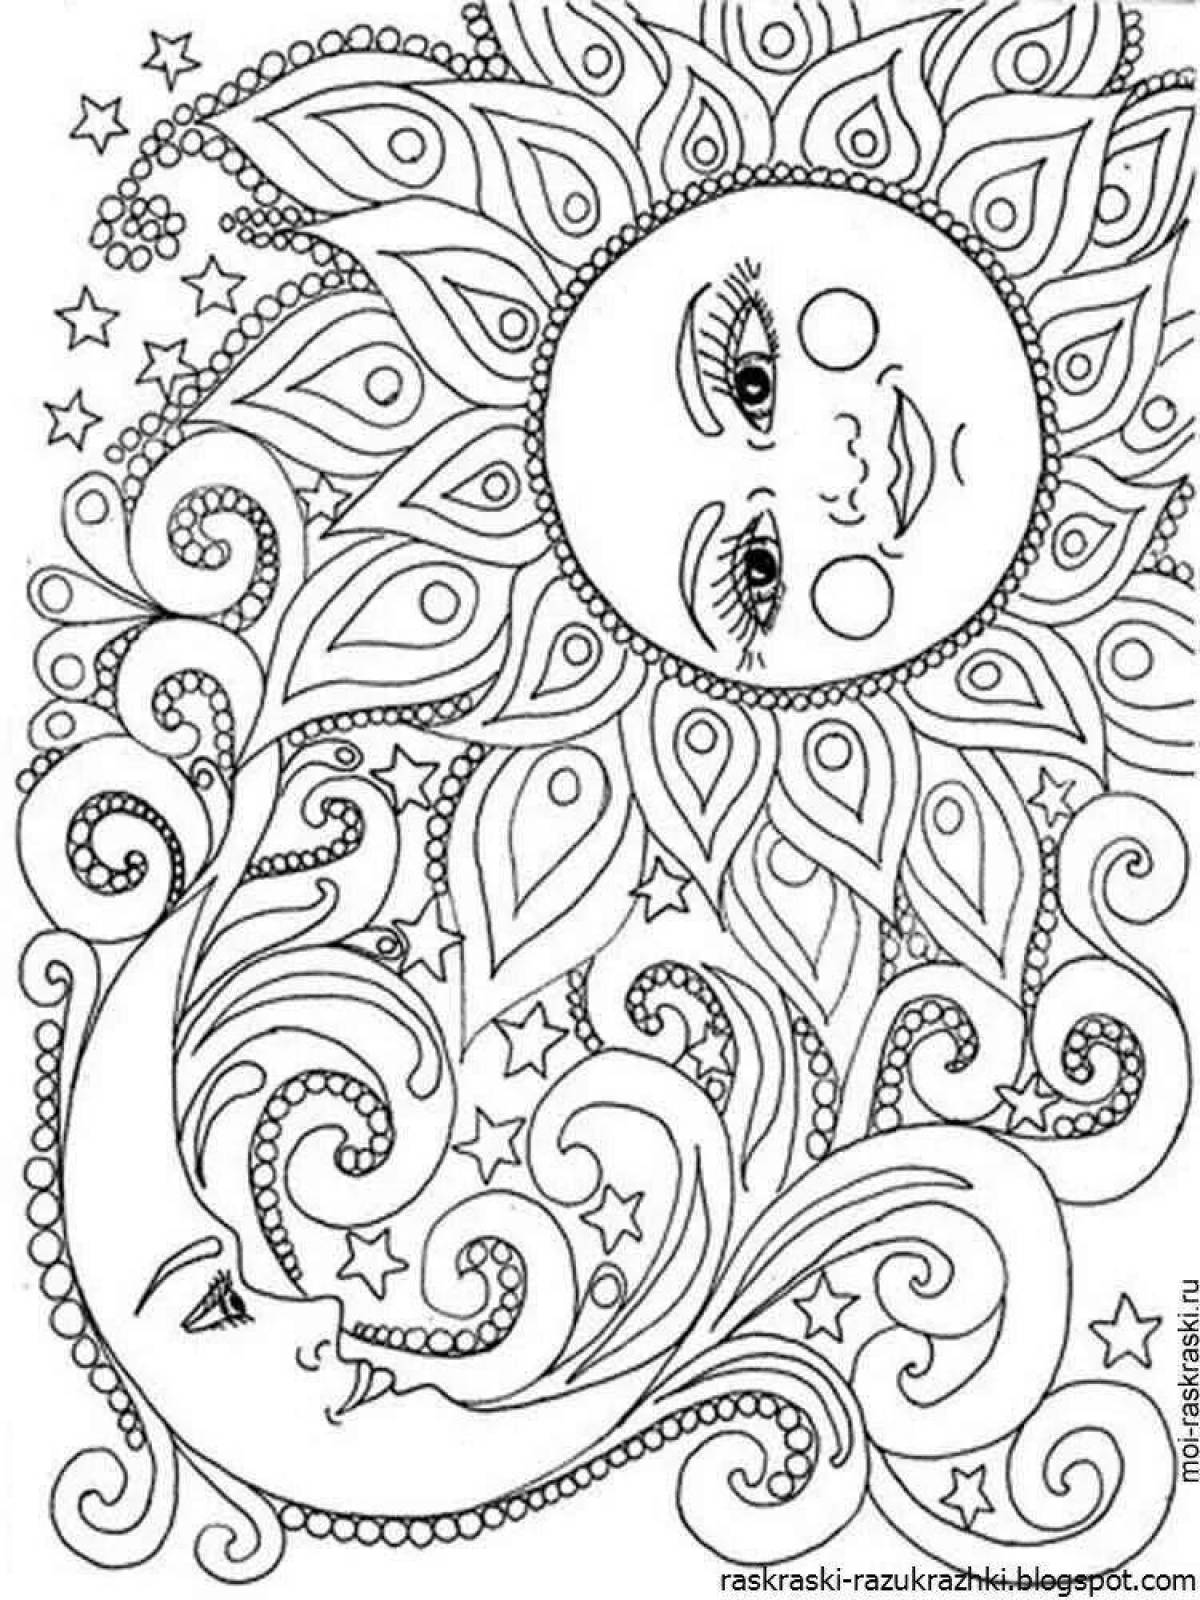 Luminous stress reliever coloring book